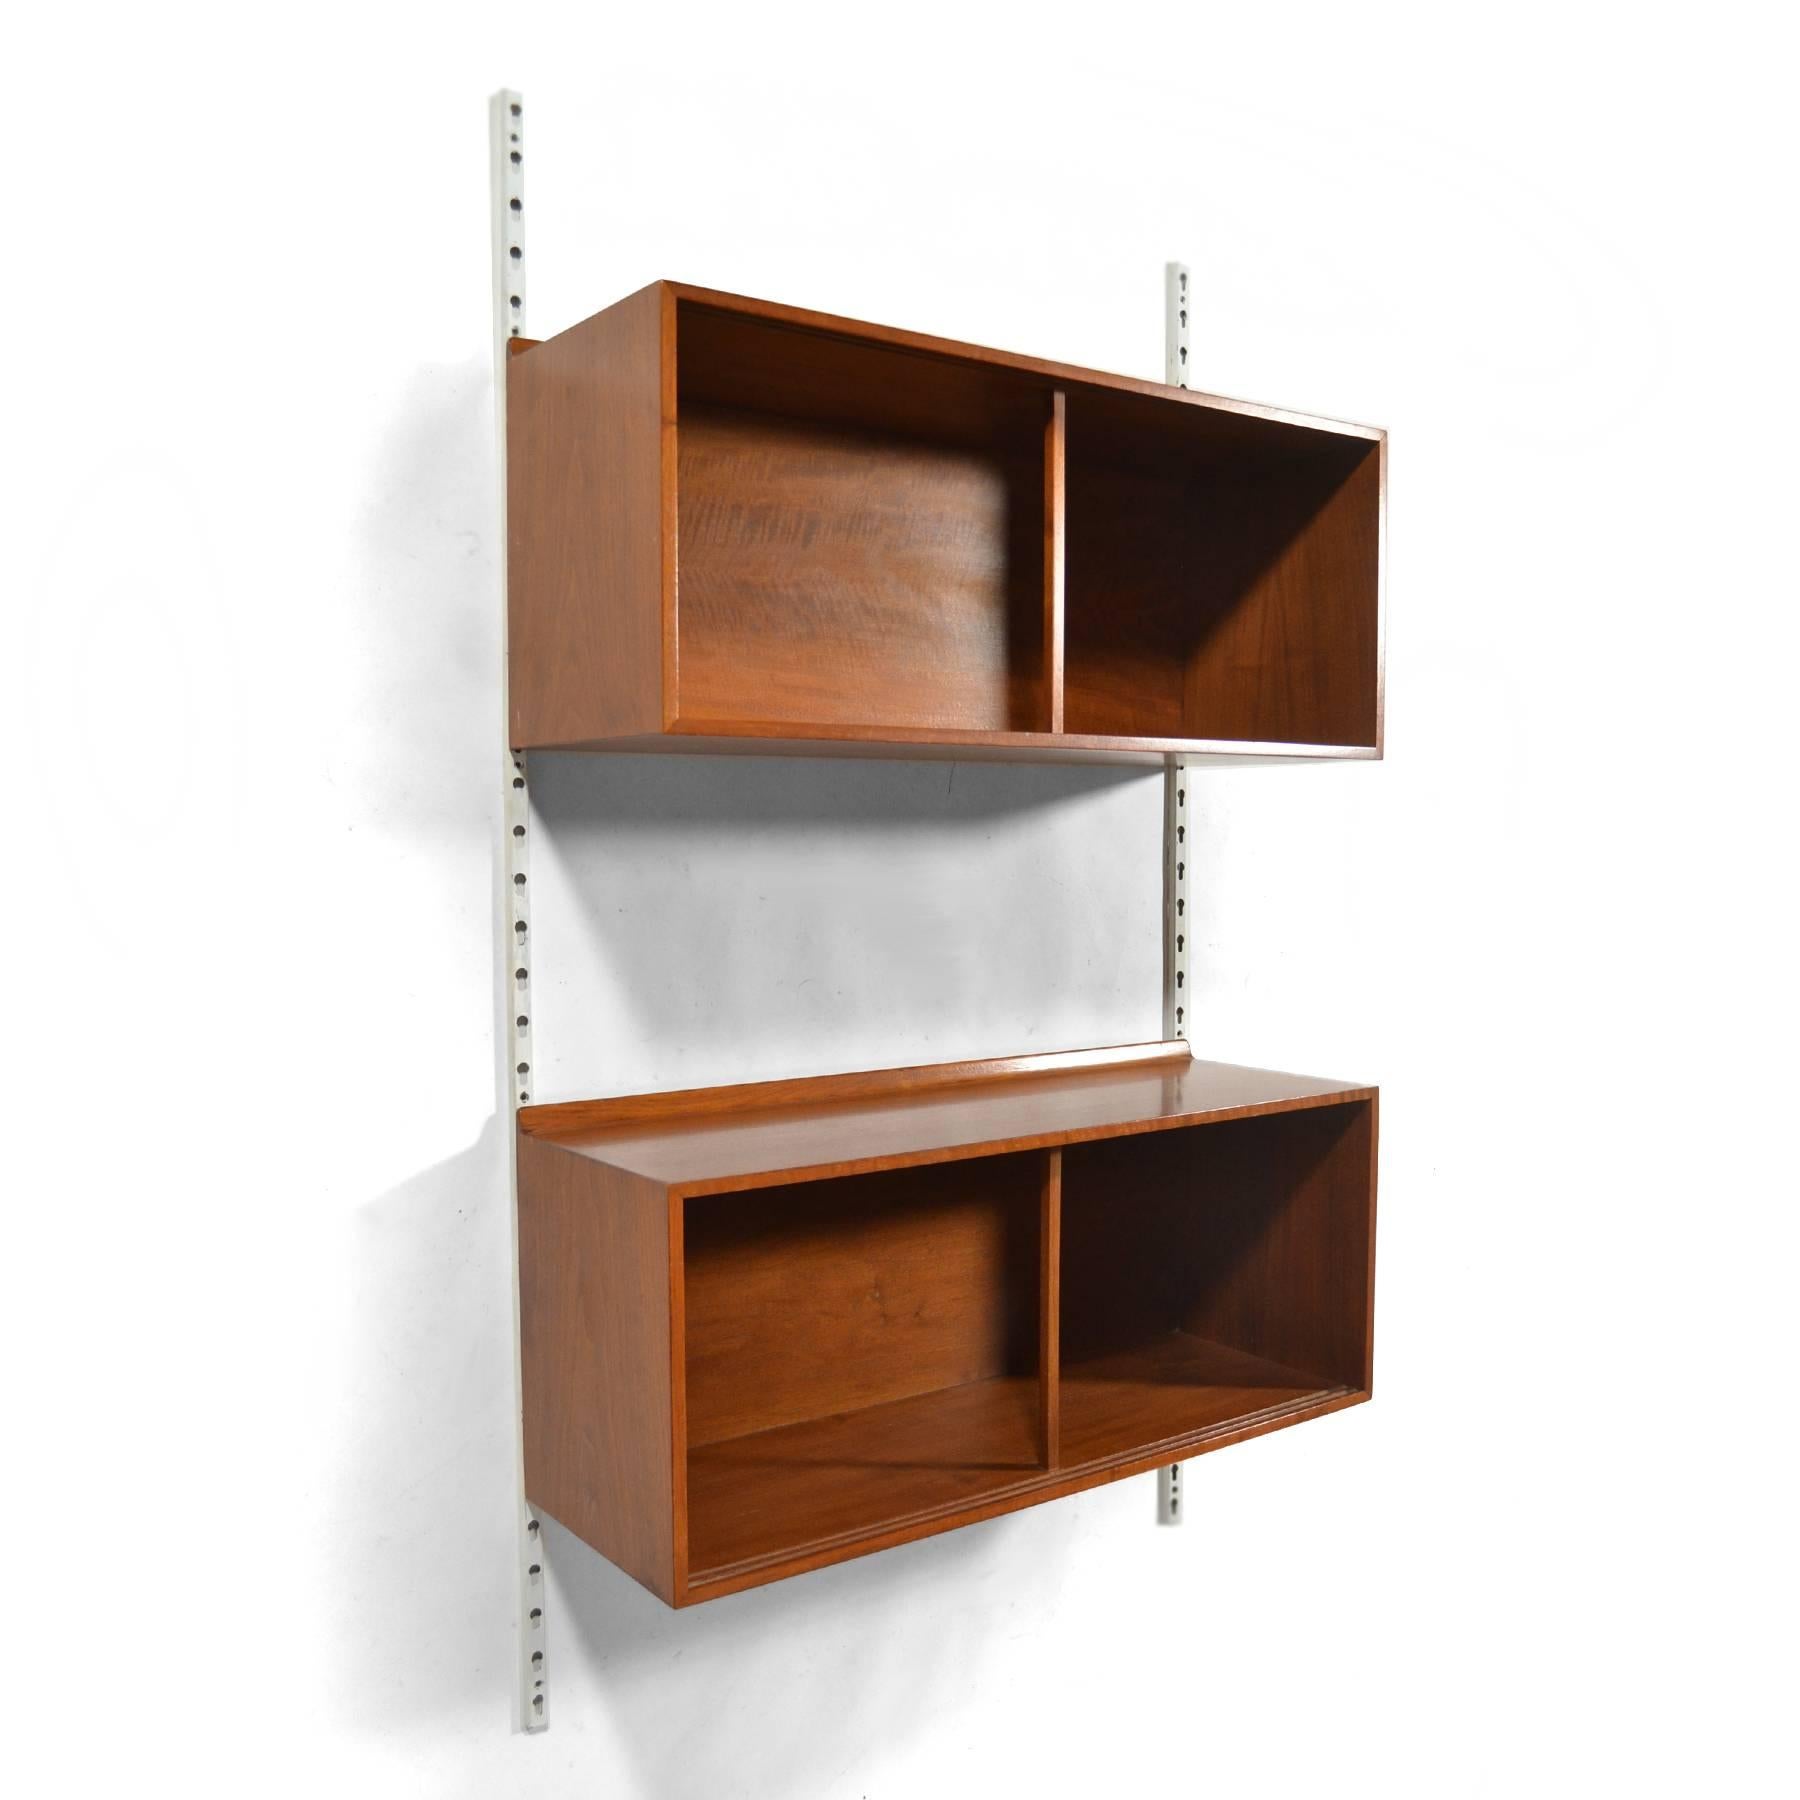 This pair of walnut Finn Juhl wall-mounted cases mount on metal uprights and can be adjusted and configured as desired. They feature details that many of Juhl's designs for Baker Furniture share, including the raised lip on the back edge.